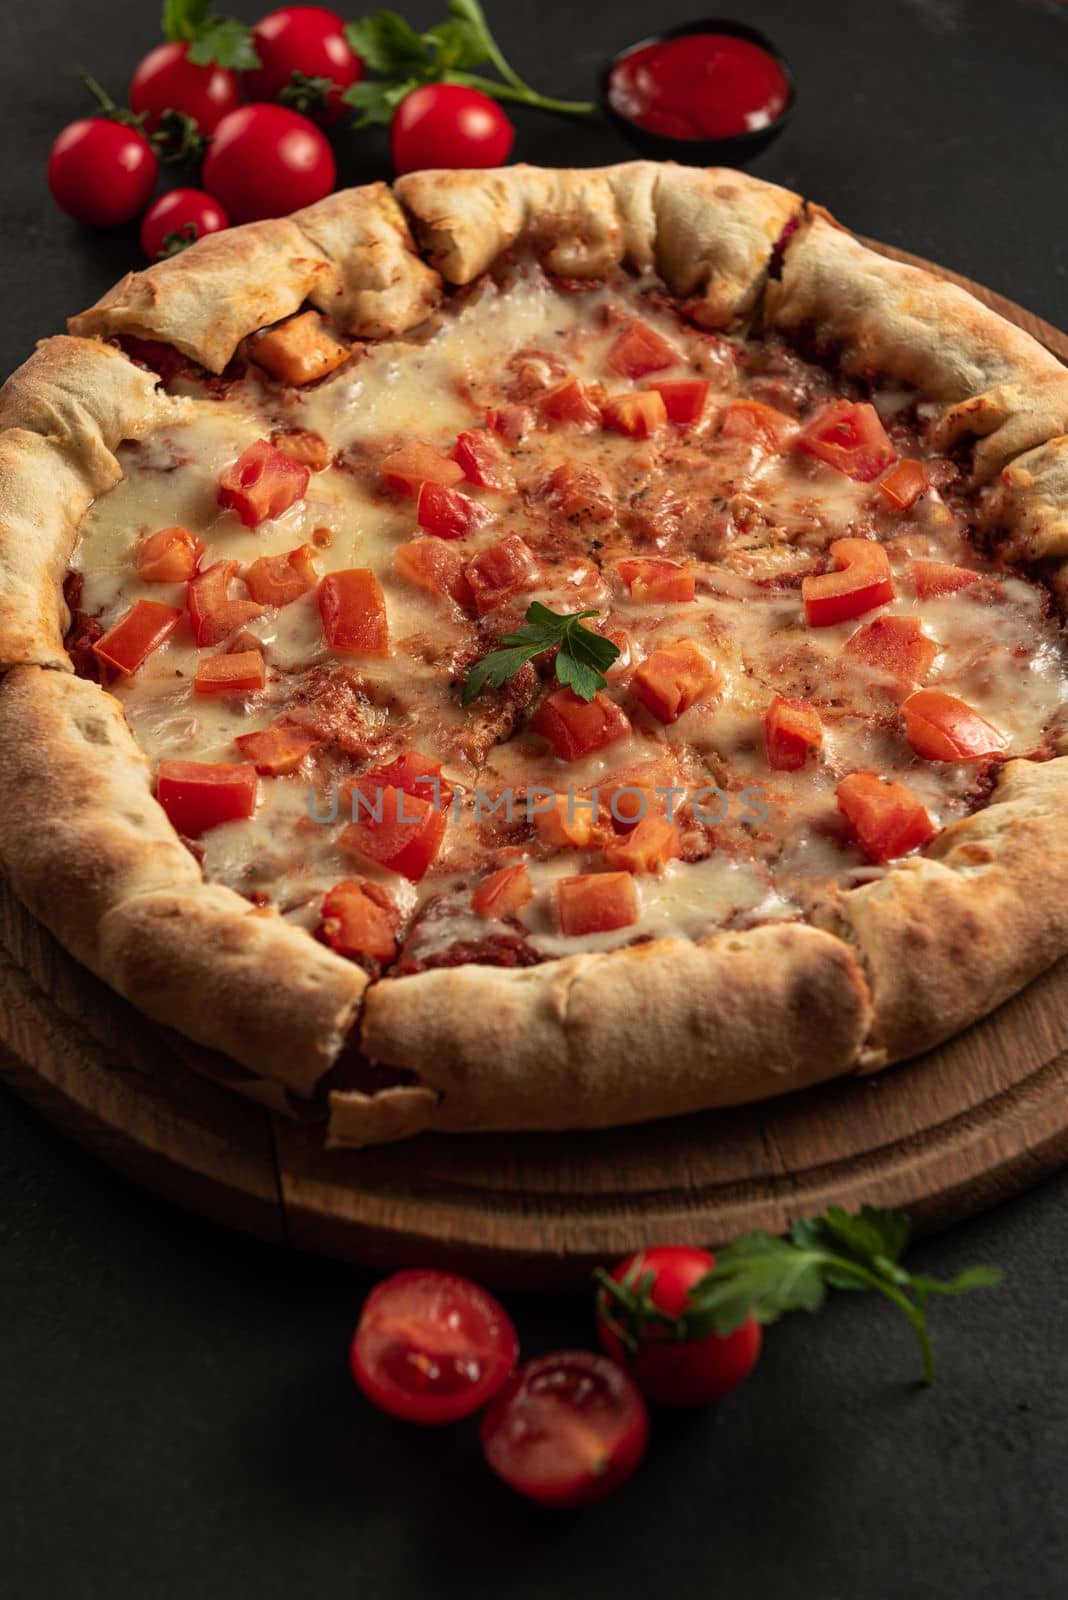 Vertical shot of a pizza with tomatoes on a dark background.